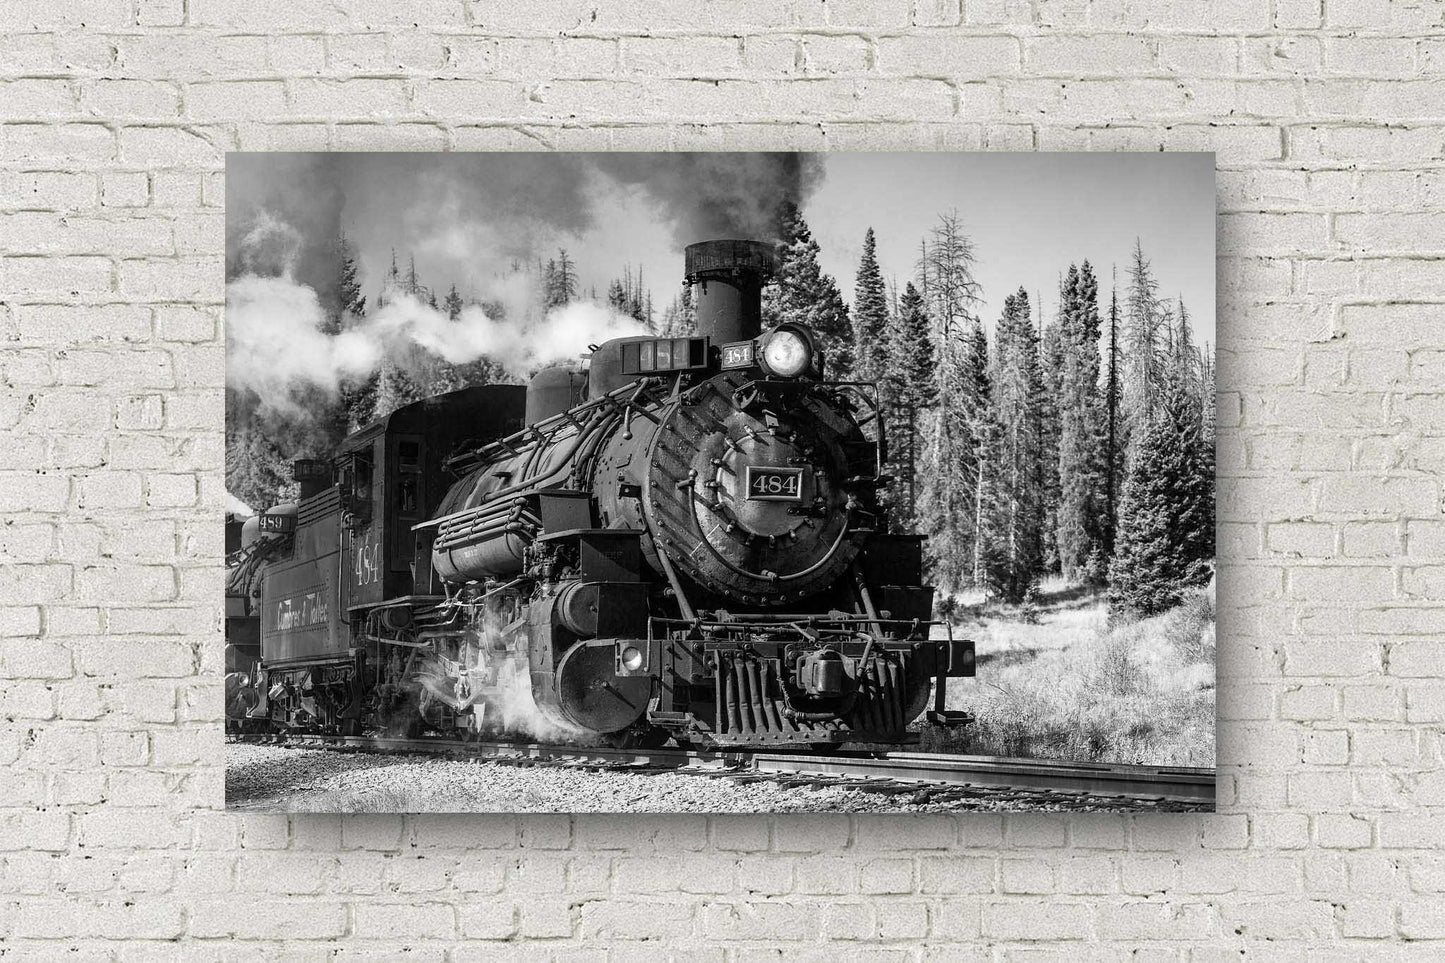 Black and White train metal print on aluminum of a Cumbres & Toltec steam engine passing through a pine tree forest on an autumn day in the Rocky Mountains of Colorado by Sean Ramsey of Southern Plains Photography.